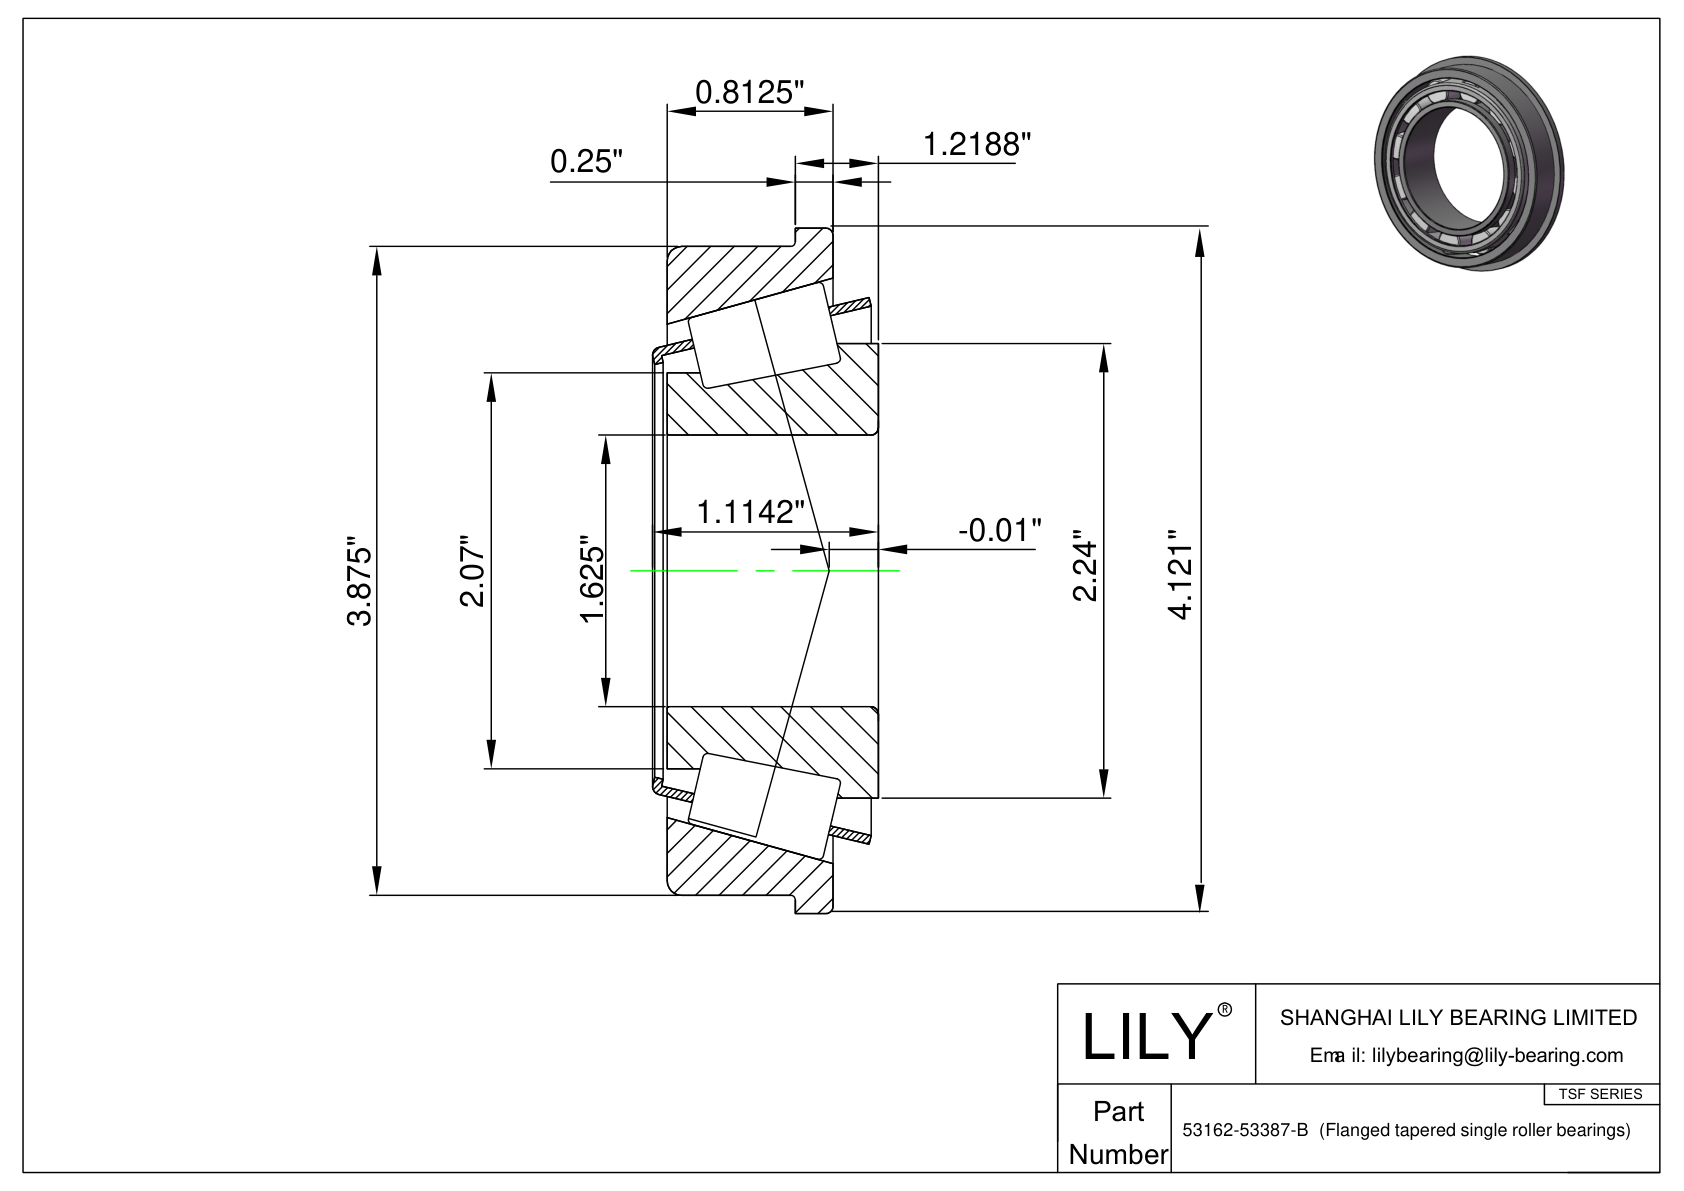 53162-53387-B TSF (Tapered Single Roller Bearings with Flange) (Imperial) cad drawing